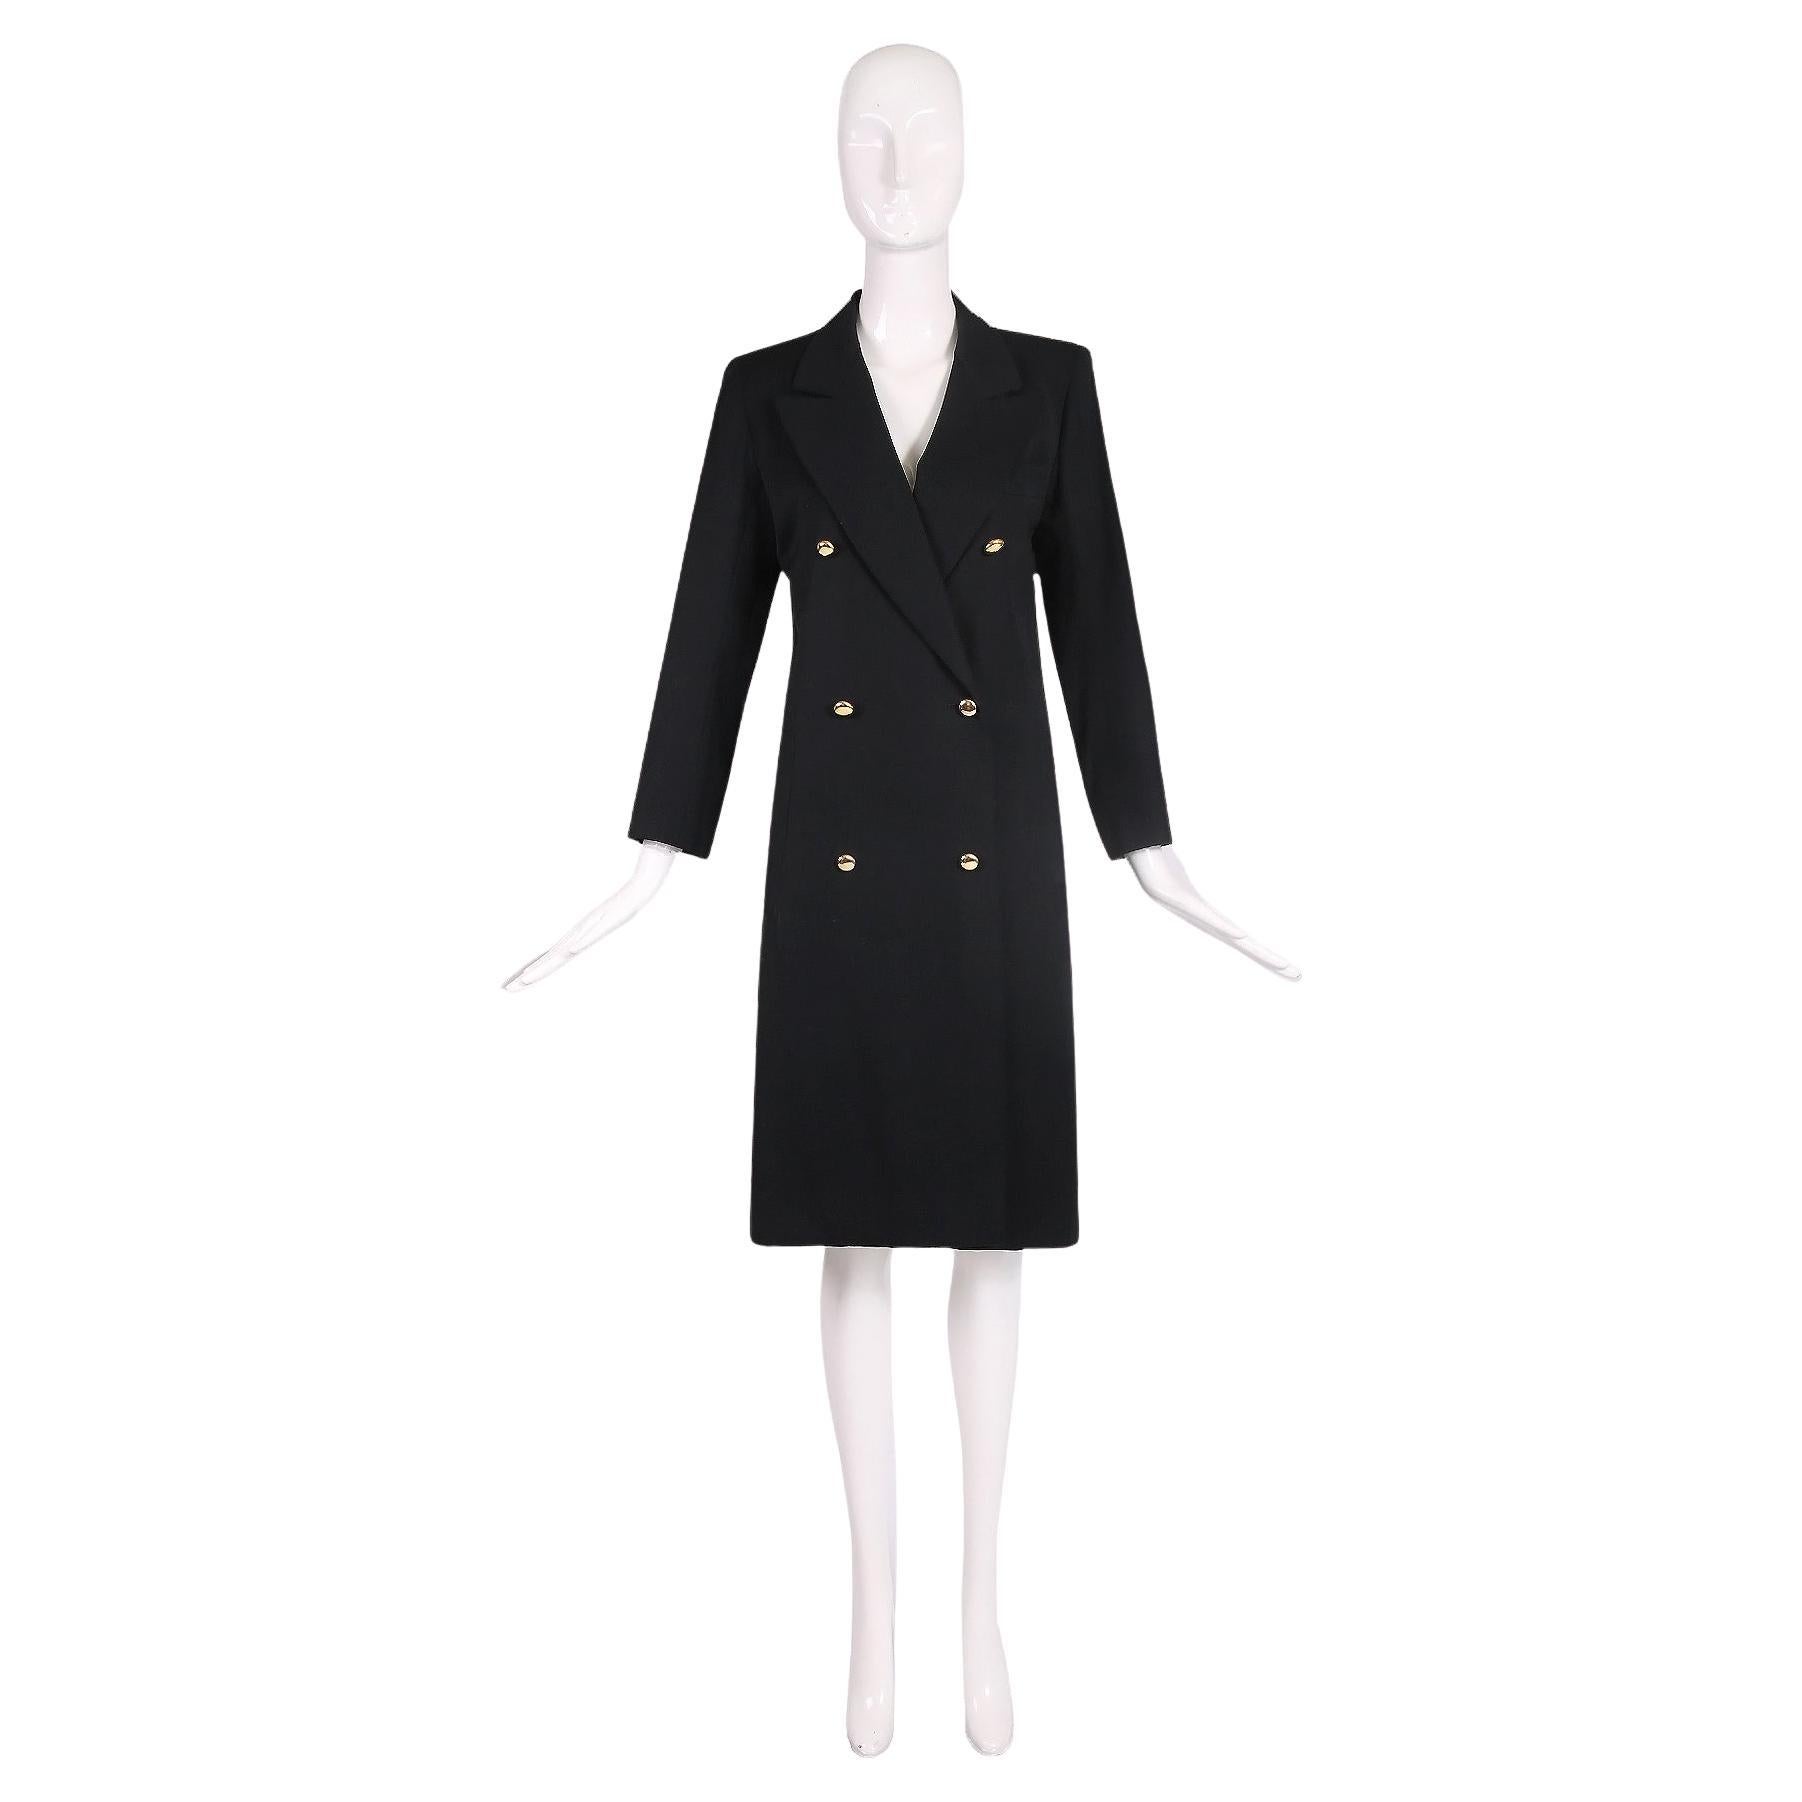 Late 1970's/early 80's Yves Saint Laurent black wool double breasted smoking coat w/gold domed buttons. Size tag 38. In excellent condition w/what looks like a small alteration at the interior - please ask questions. Please consult